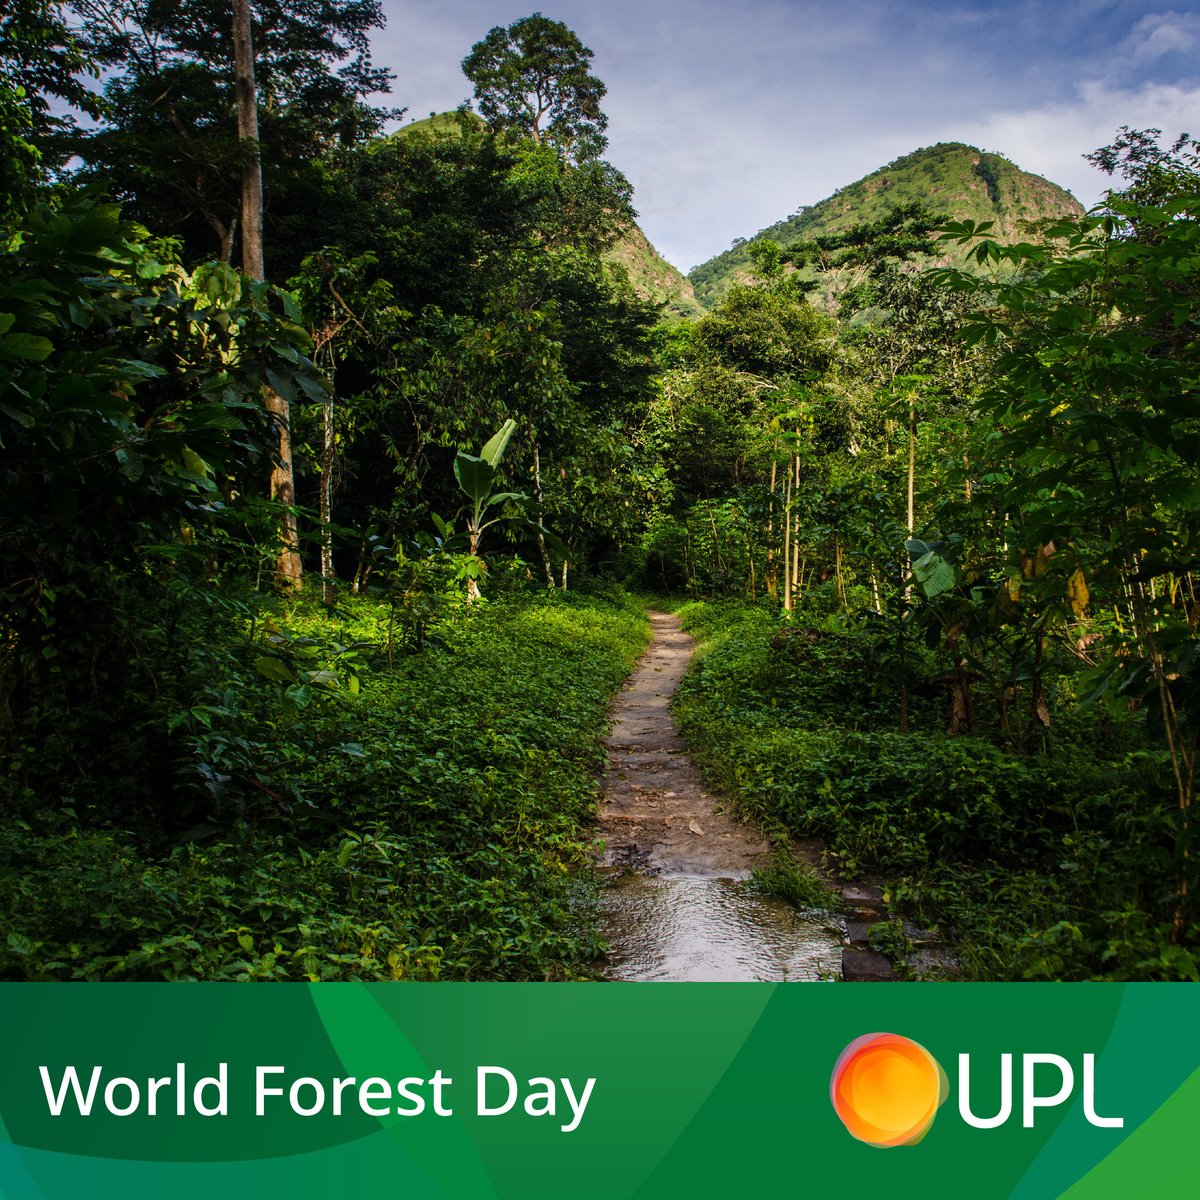 As the first agri-inputs company to join the Cocoa and Forests Initiative, we are proud to do our part to help end deforestation and restore forest areas in Côte d’Ivoire and Ghana. Learn more about the initiative: worldcocoafoundation.org/programmes-and… #WorldForestDay #UPL #ForestConservation